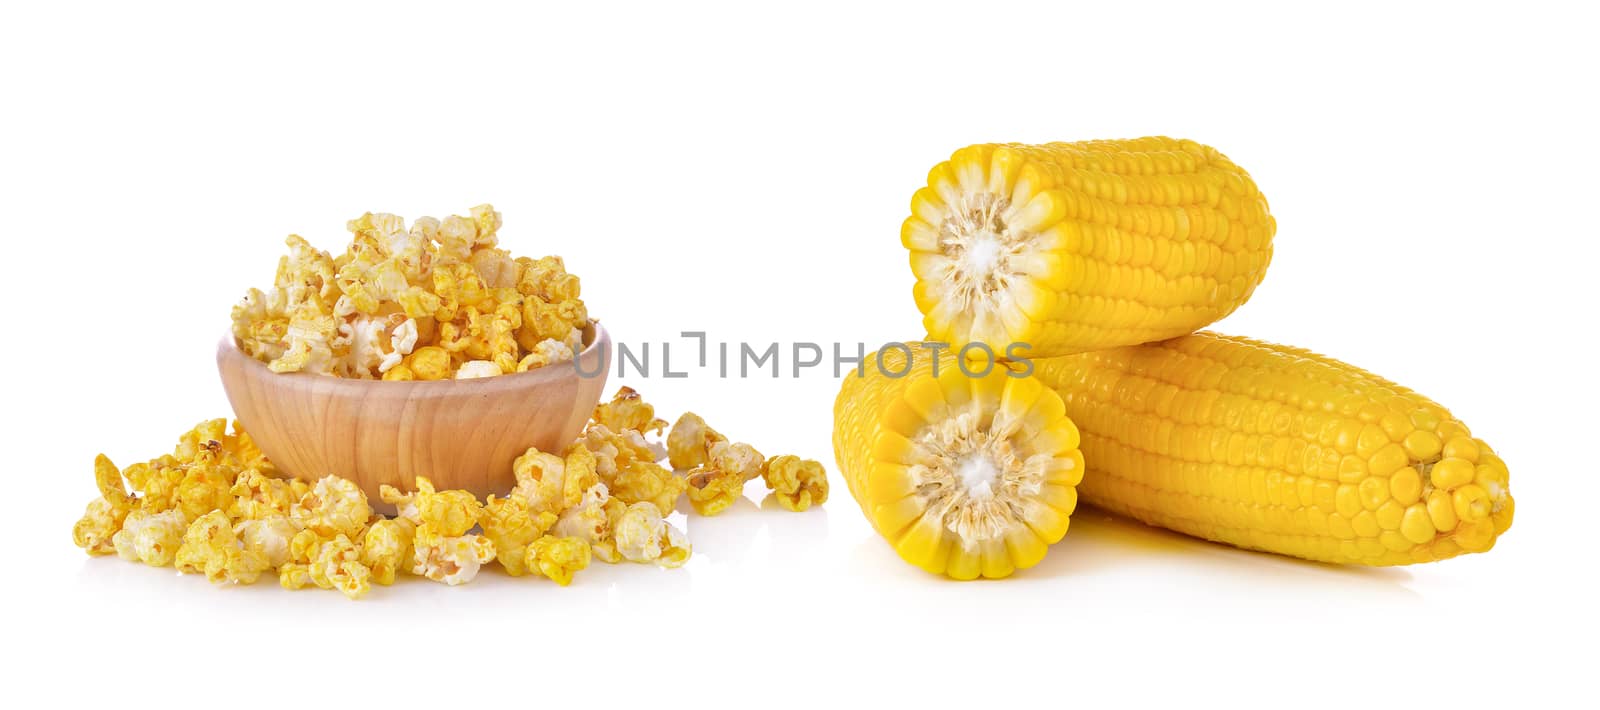 corn and Pop Corn on white background